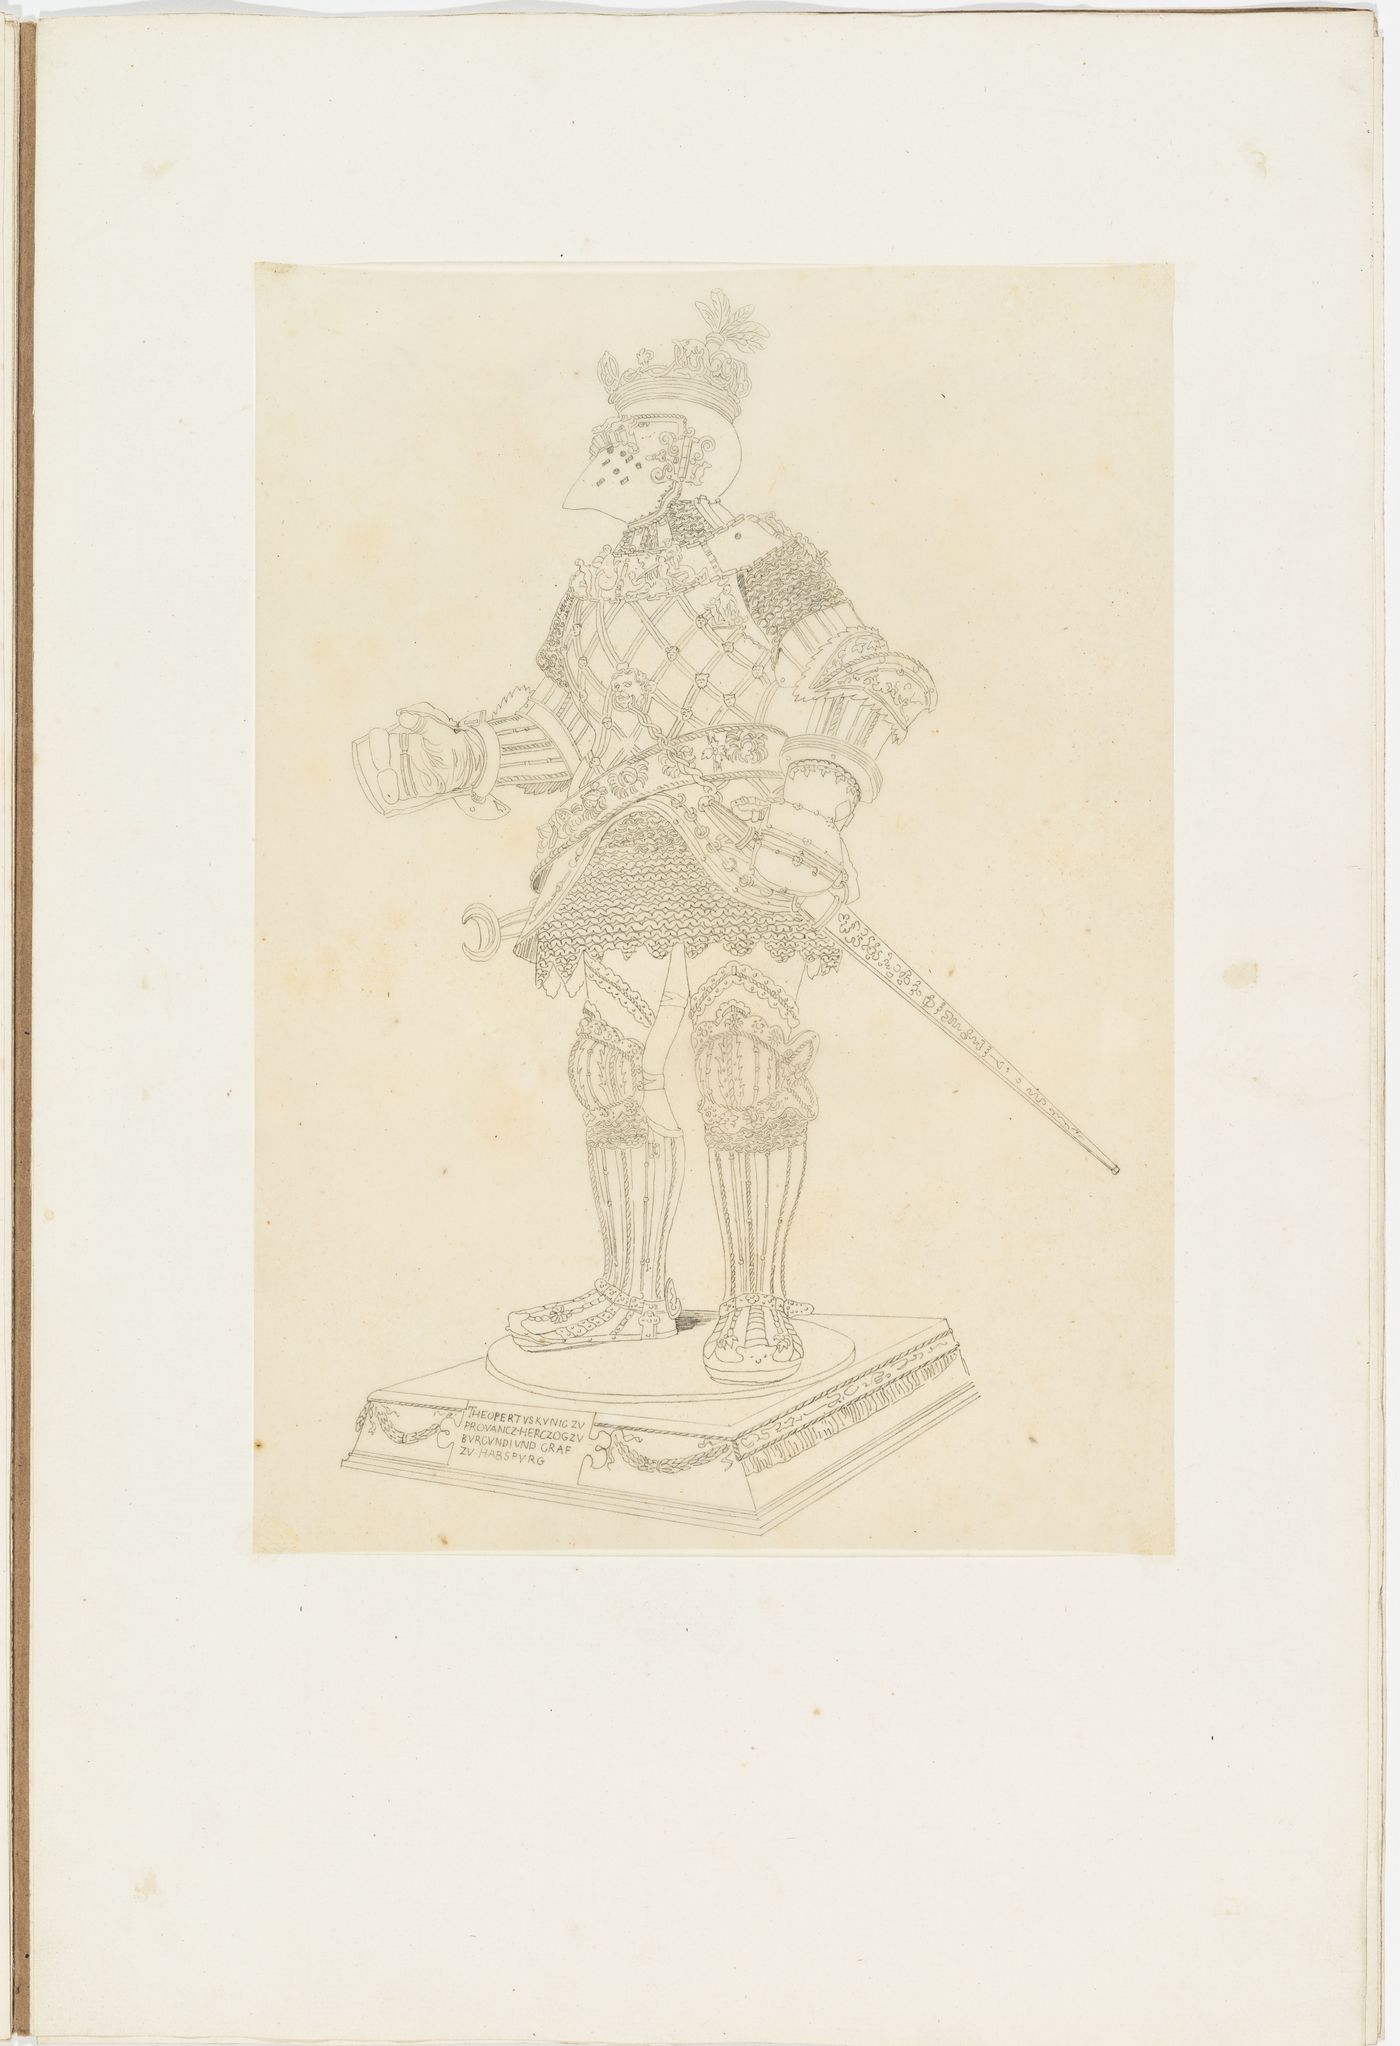 Drawing of the statue of Theodoric, King of the Eastern Goths from the cenotaph of Emperor Maximilian I, Hofkirche, Innsbruck